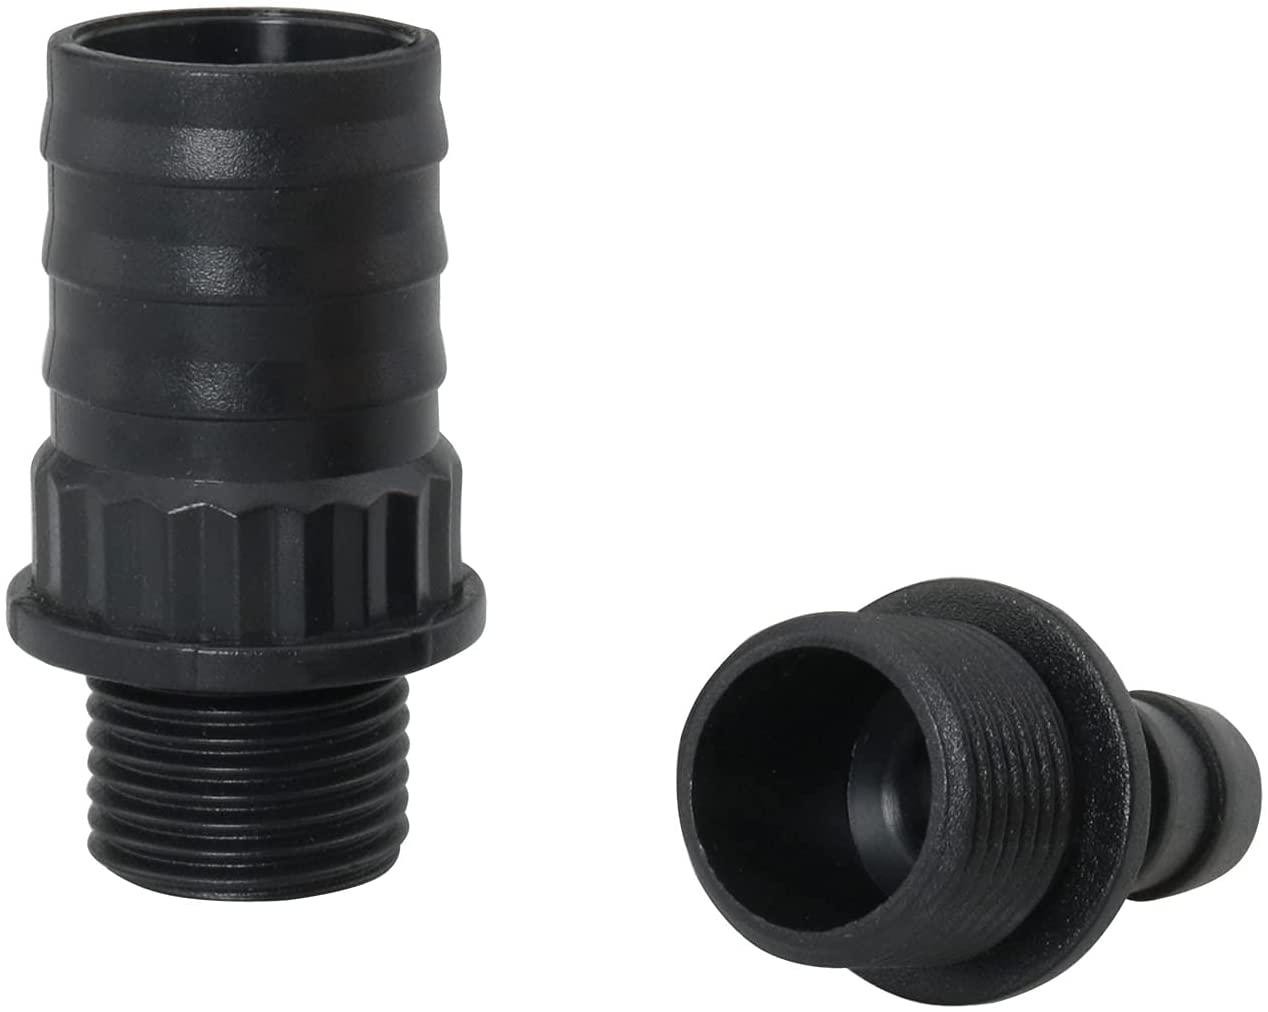 BAIRONG Nozzles Kit for Fountain Pump, Replacement Adapters 5 Sizes Plastic Nozzles for Aquarium, Fish Tank, Pond, Hydroponics, Statuary Animals & Pet Supplies > Pet Supplies > Fish Supplies > Aquarium & Pond Tubing BAIRONG   